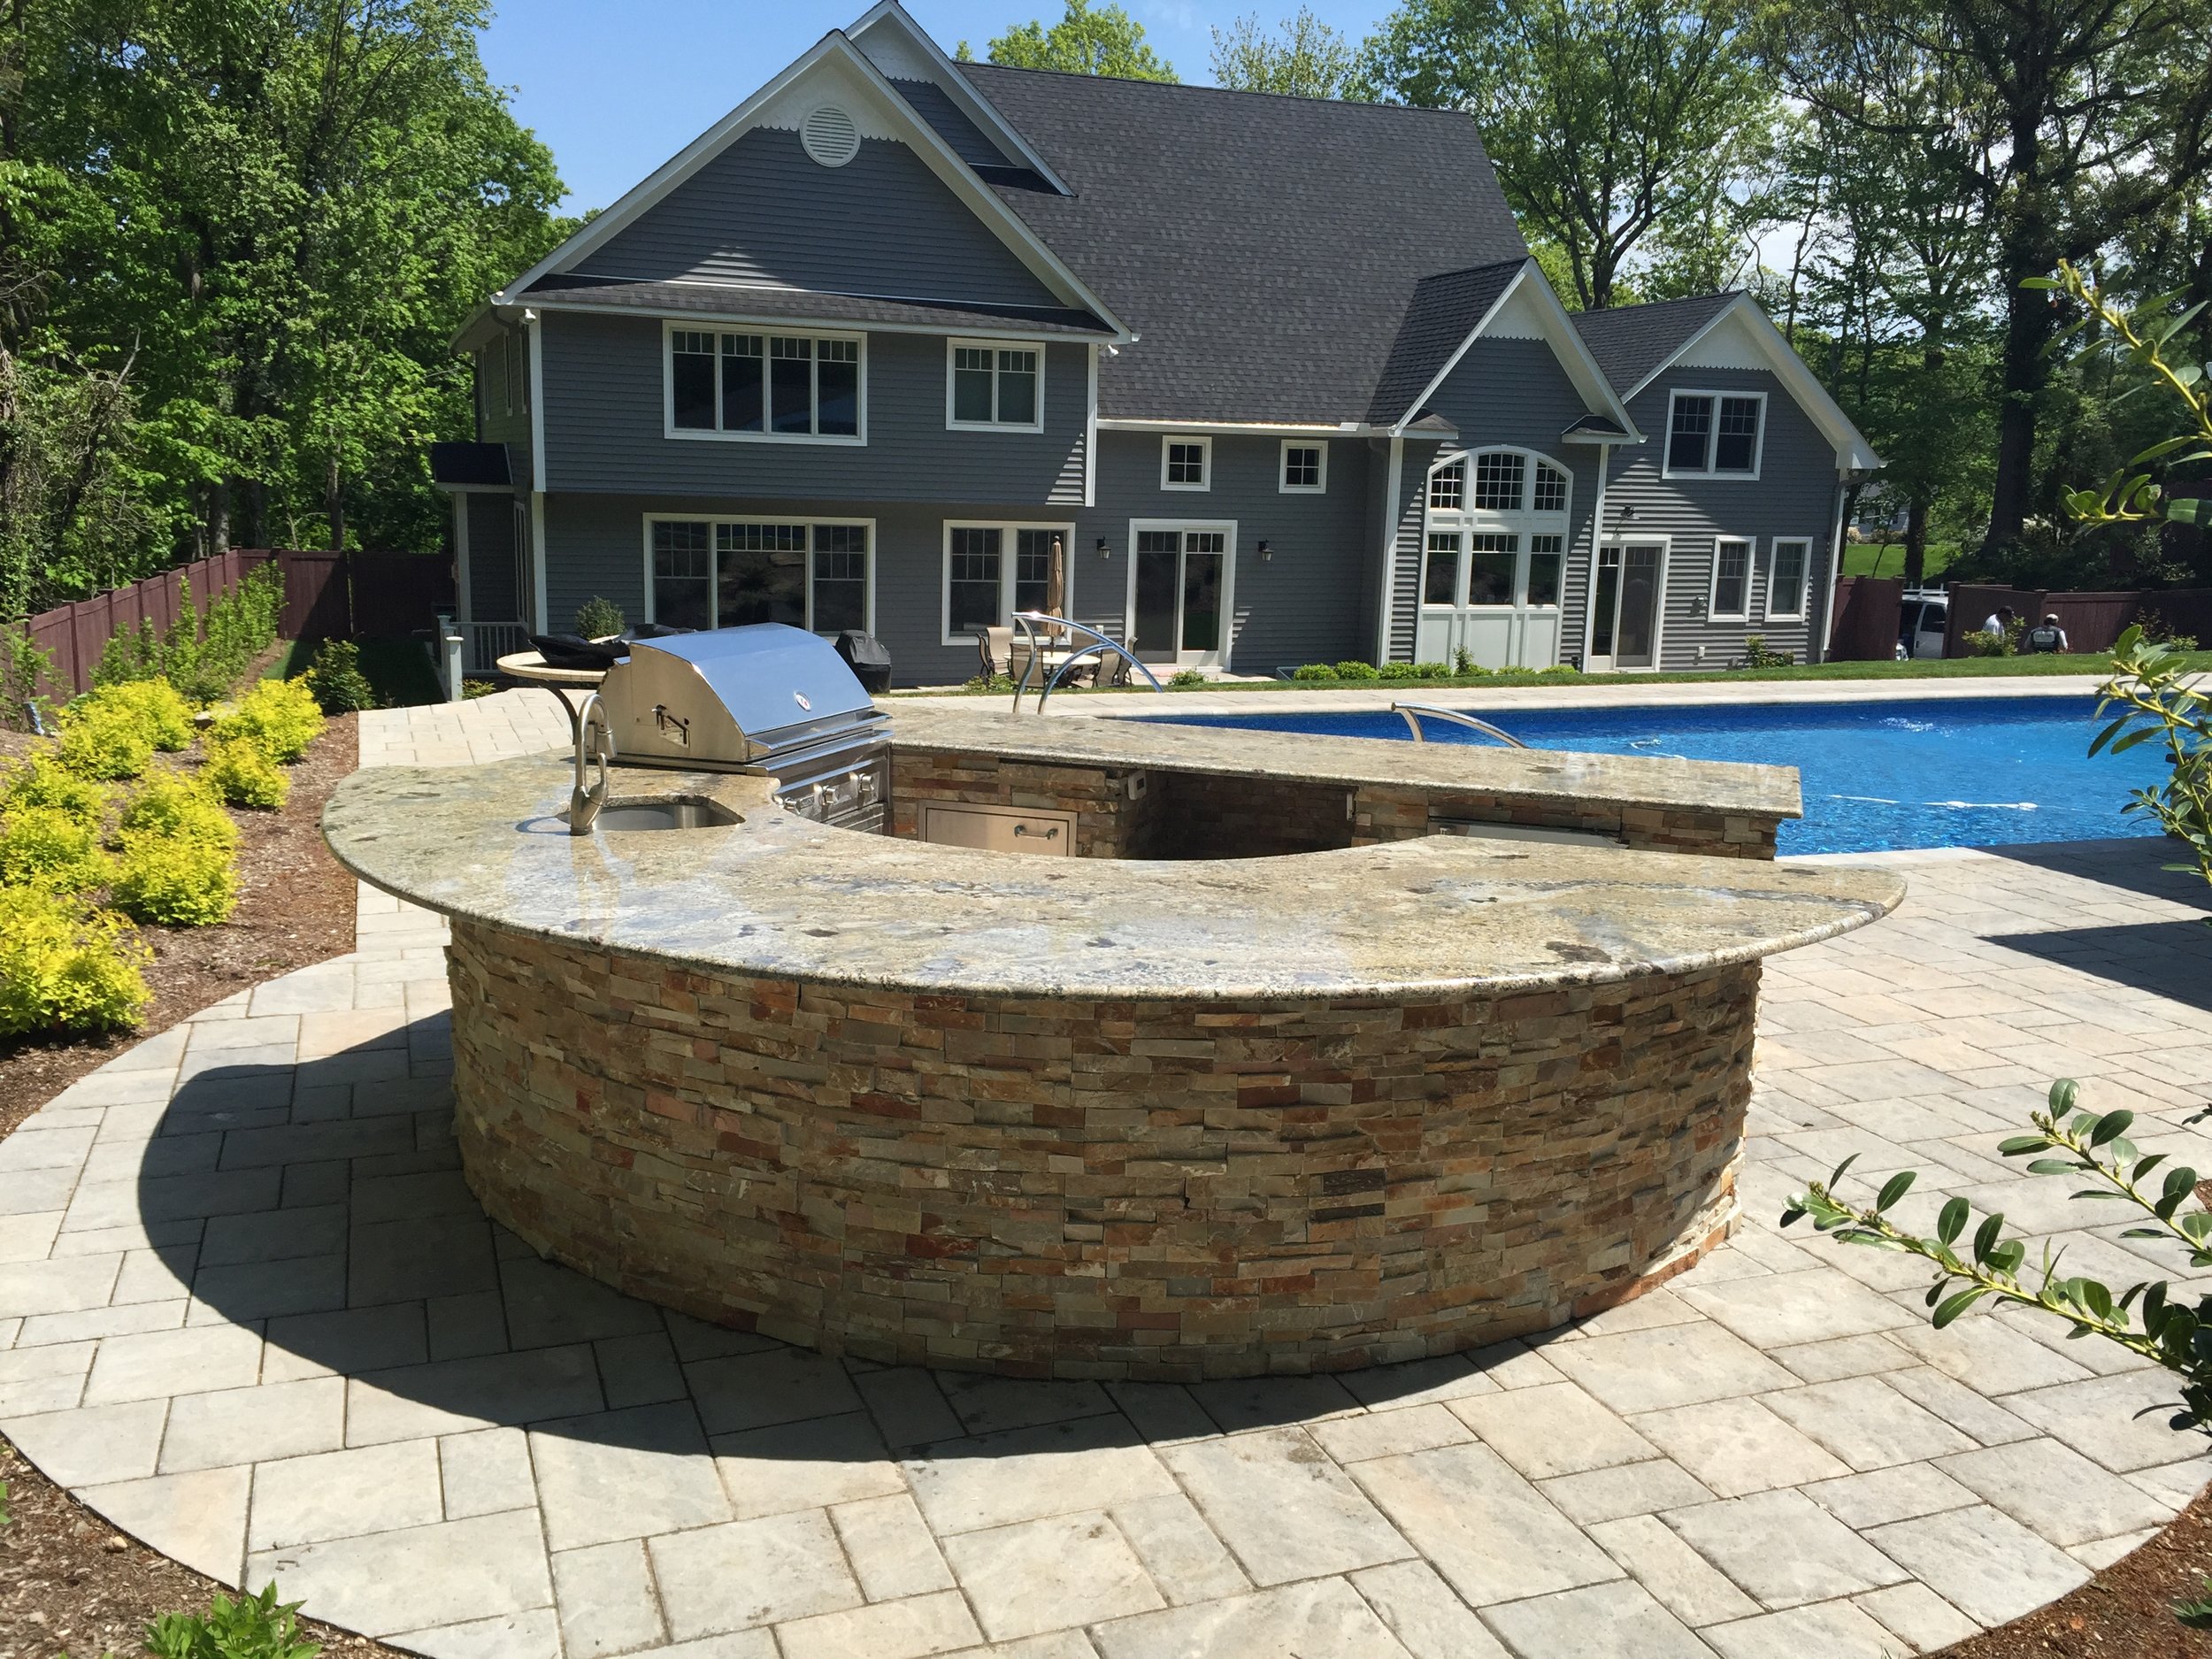 Professional outdoor kitchen landscape design company in Long Island, NY